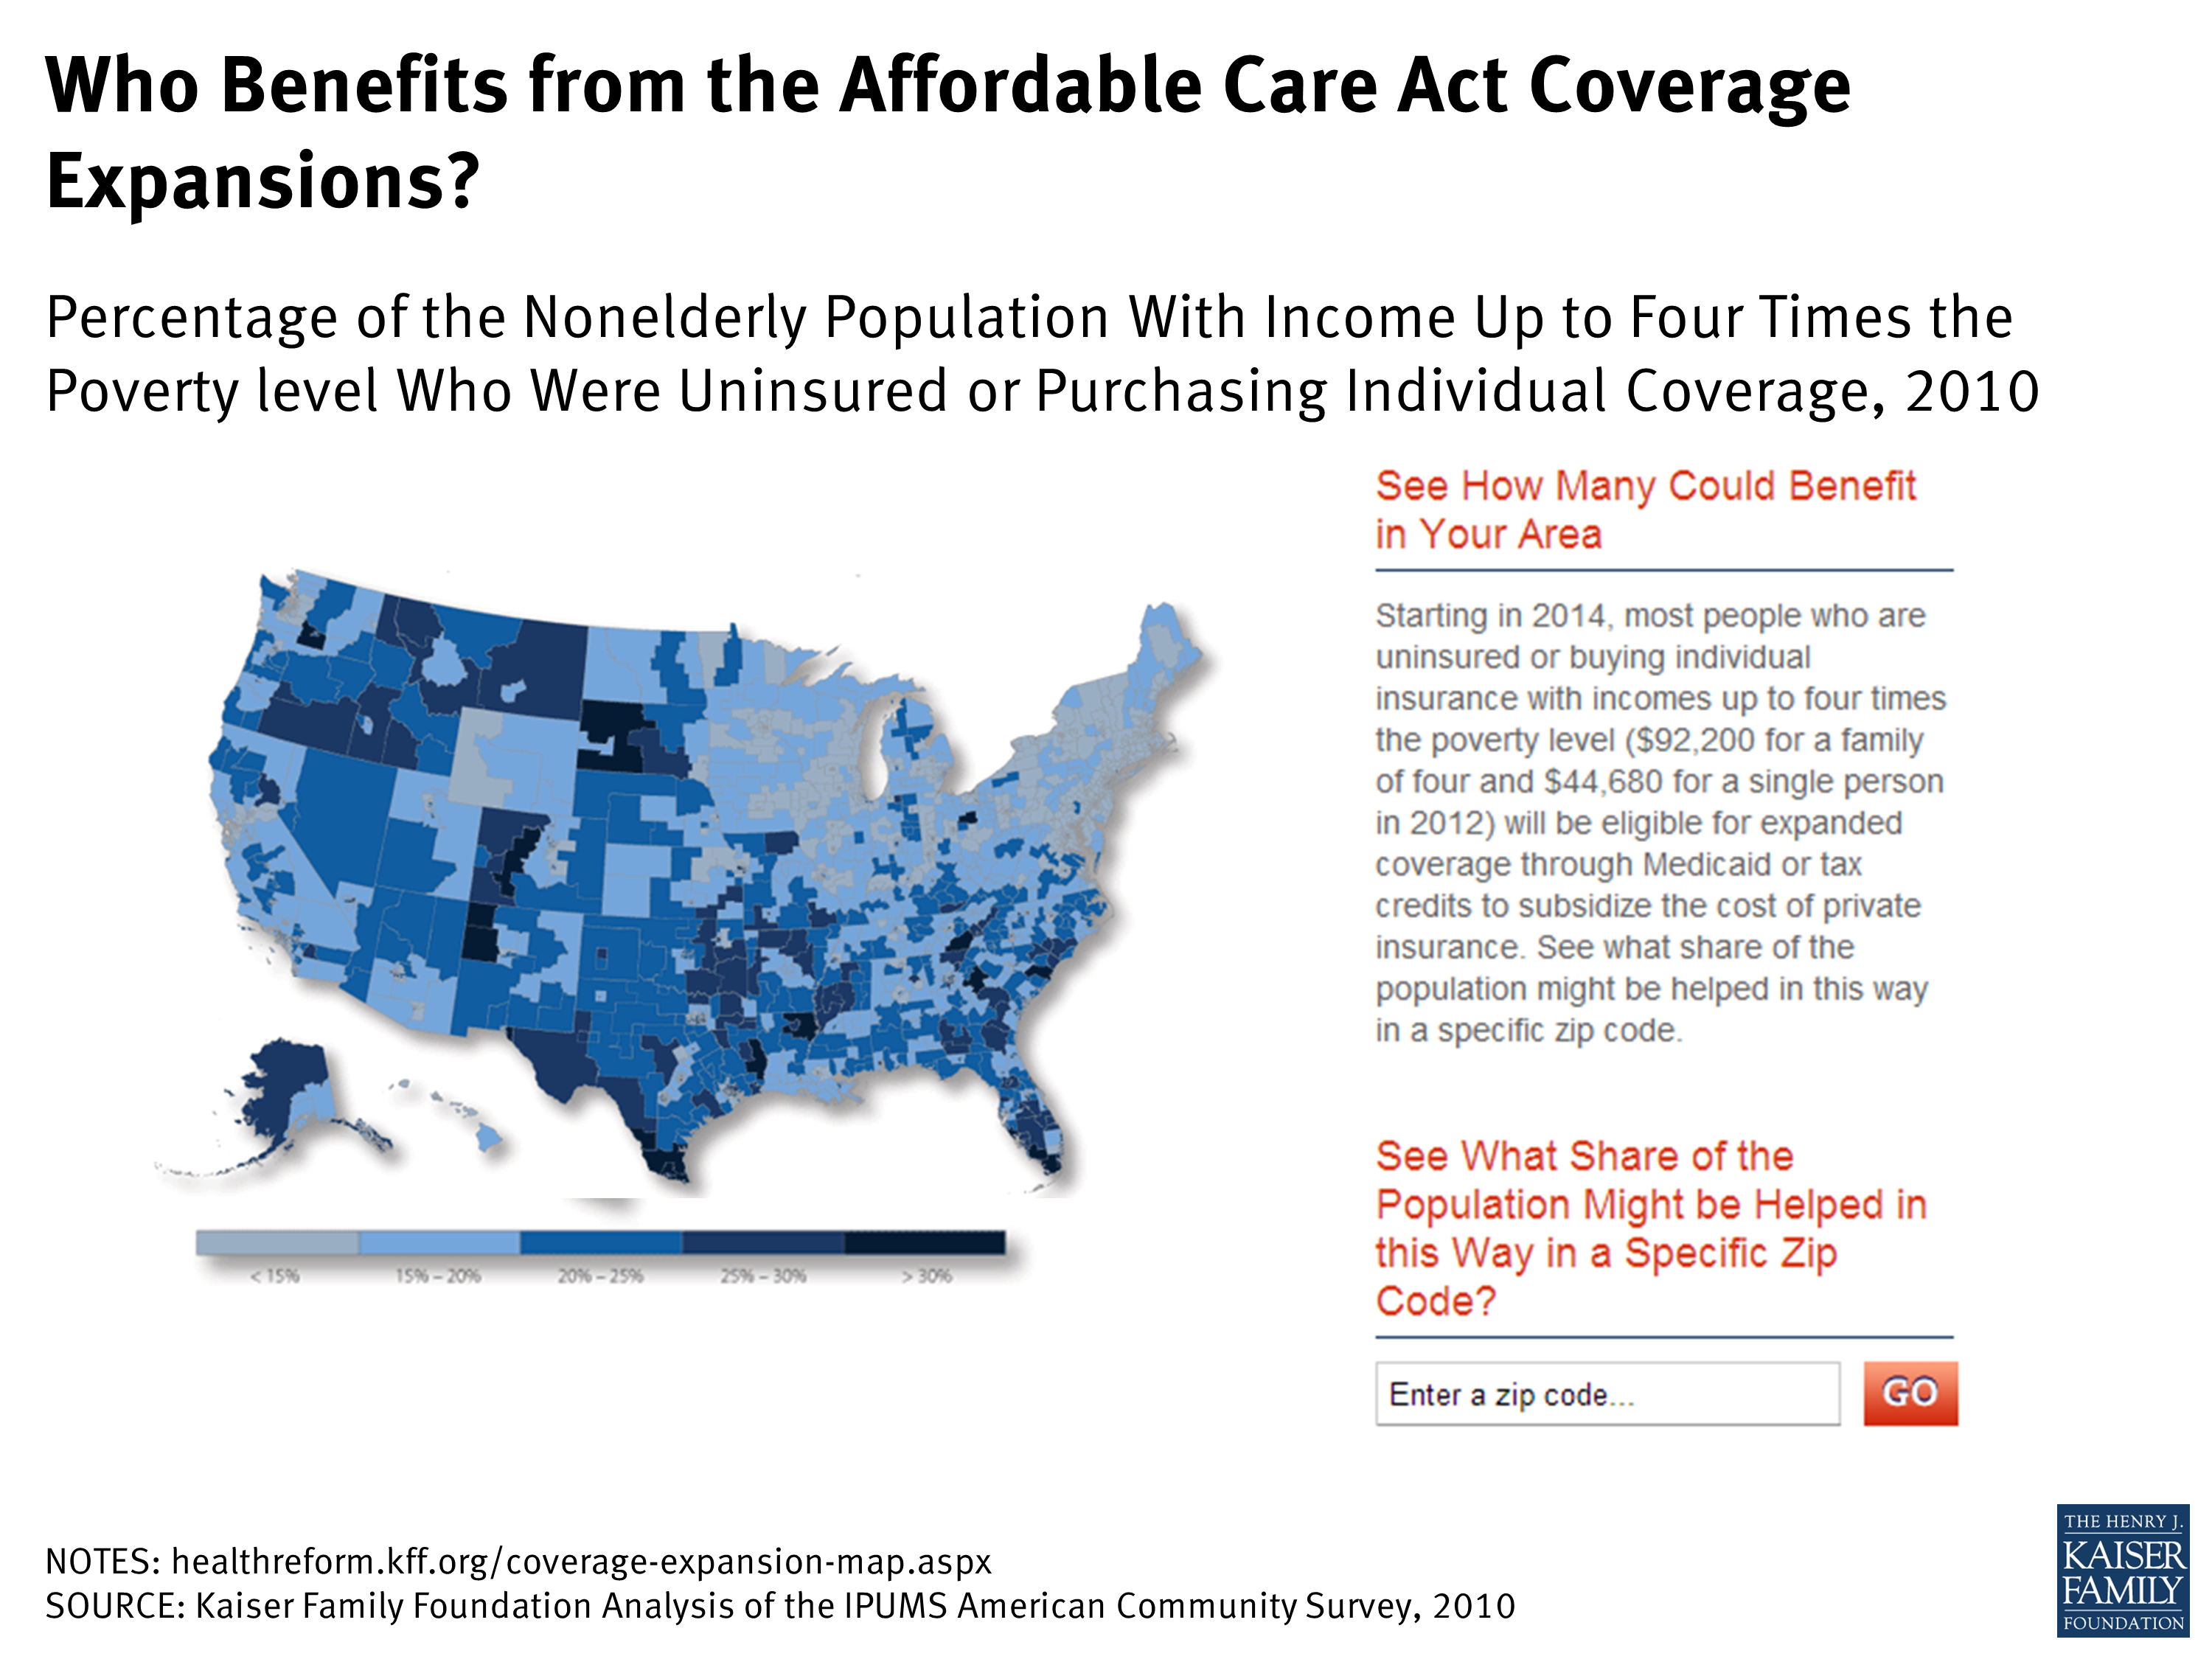 Who Benefits from the Affordable Care Act Coverage Expansions? KFF